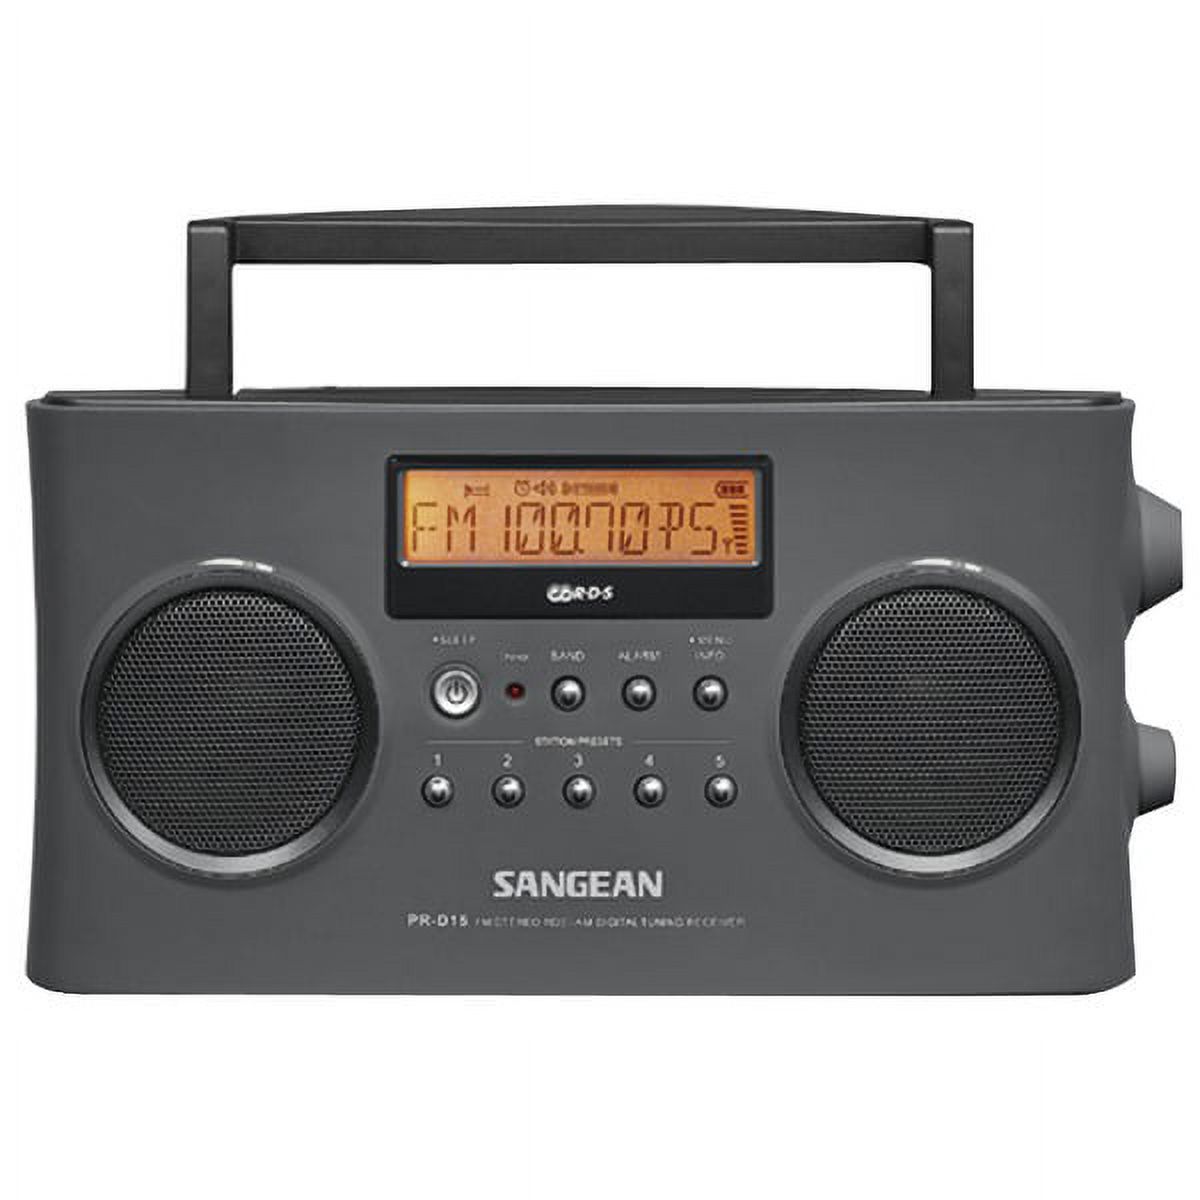 SangeanÂ® Digital Portable Stereo Rds Receiver - image 1 of 1